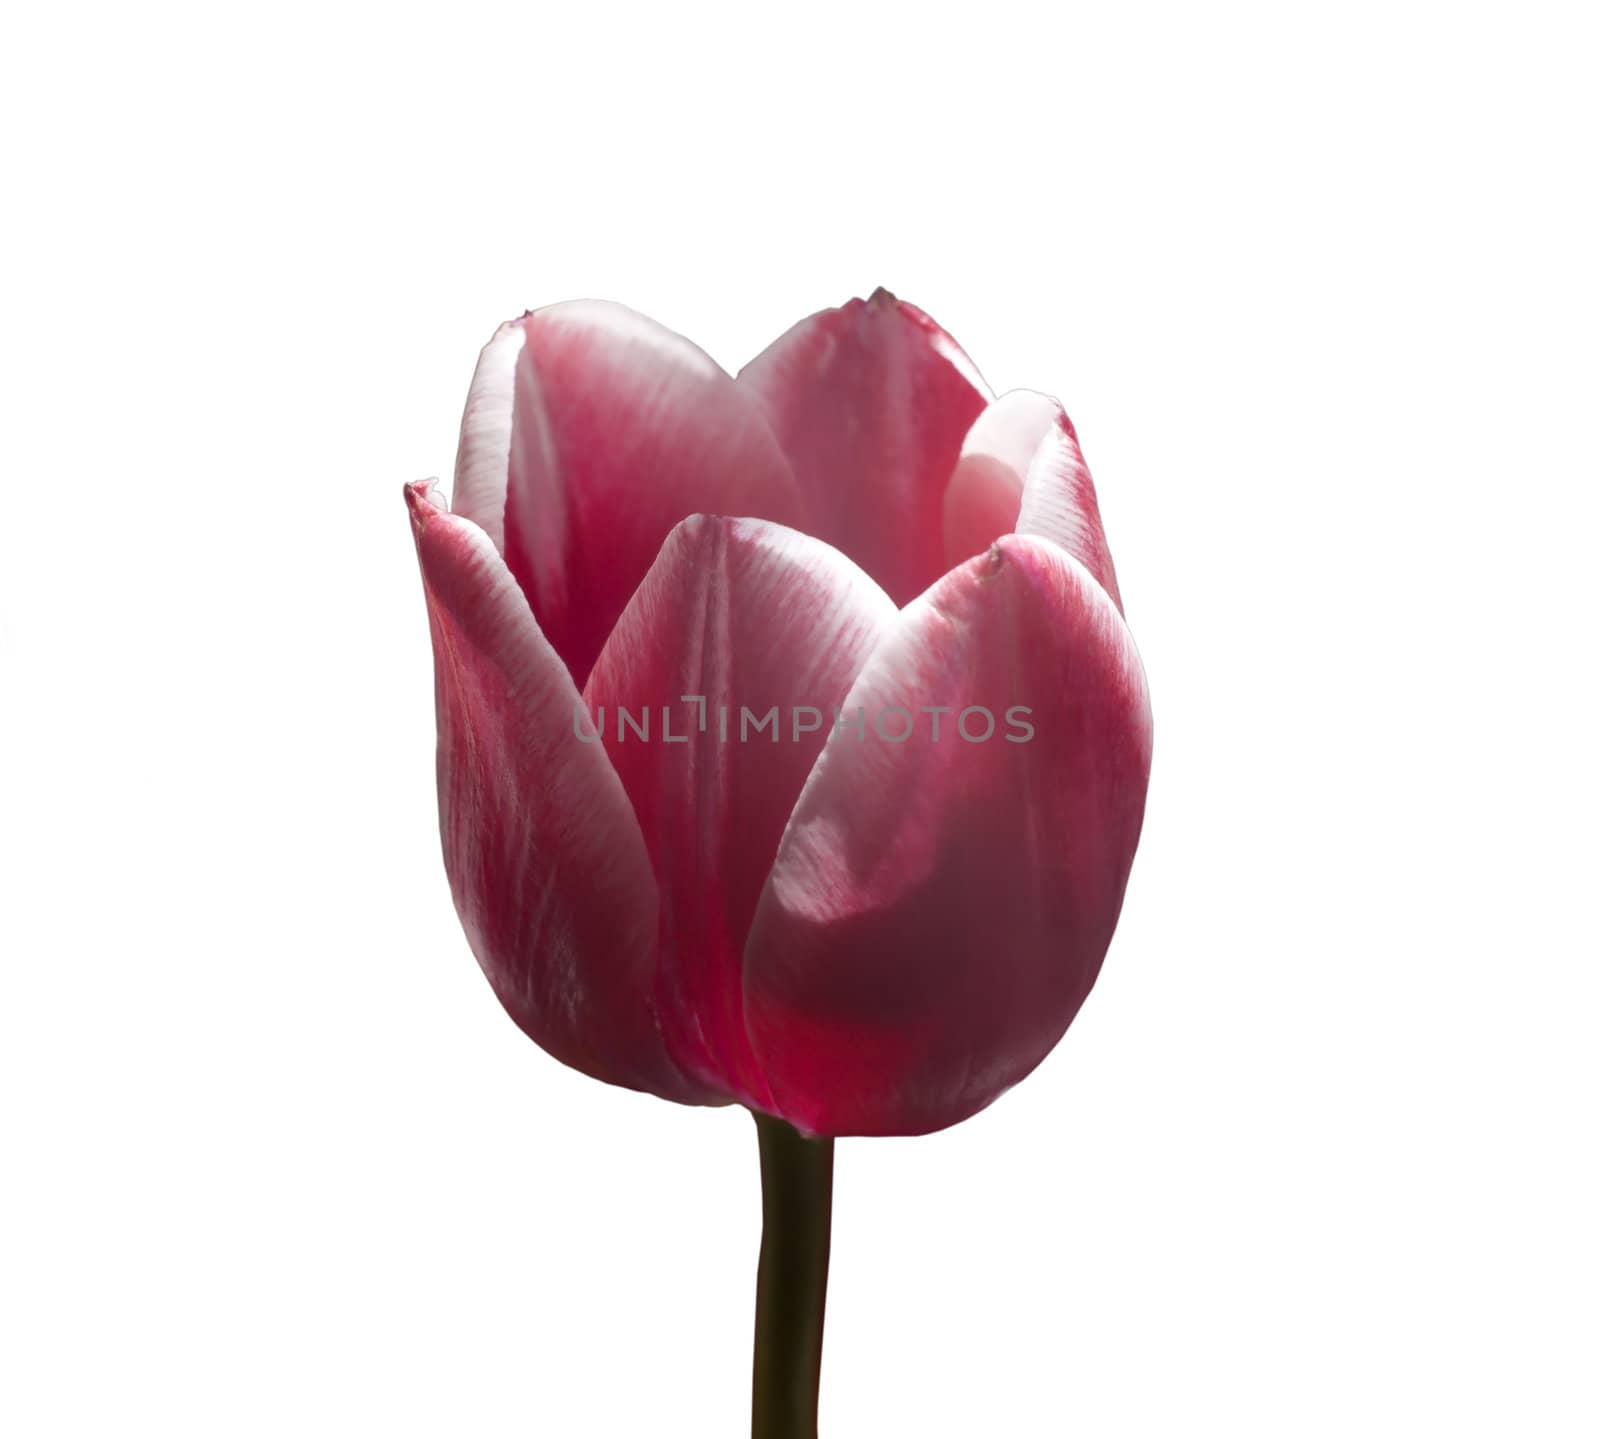 A general view of a pink tulip bud, isolated on white background